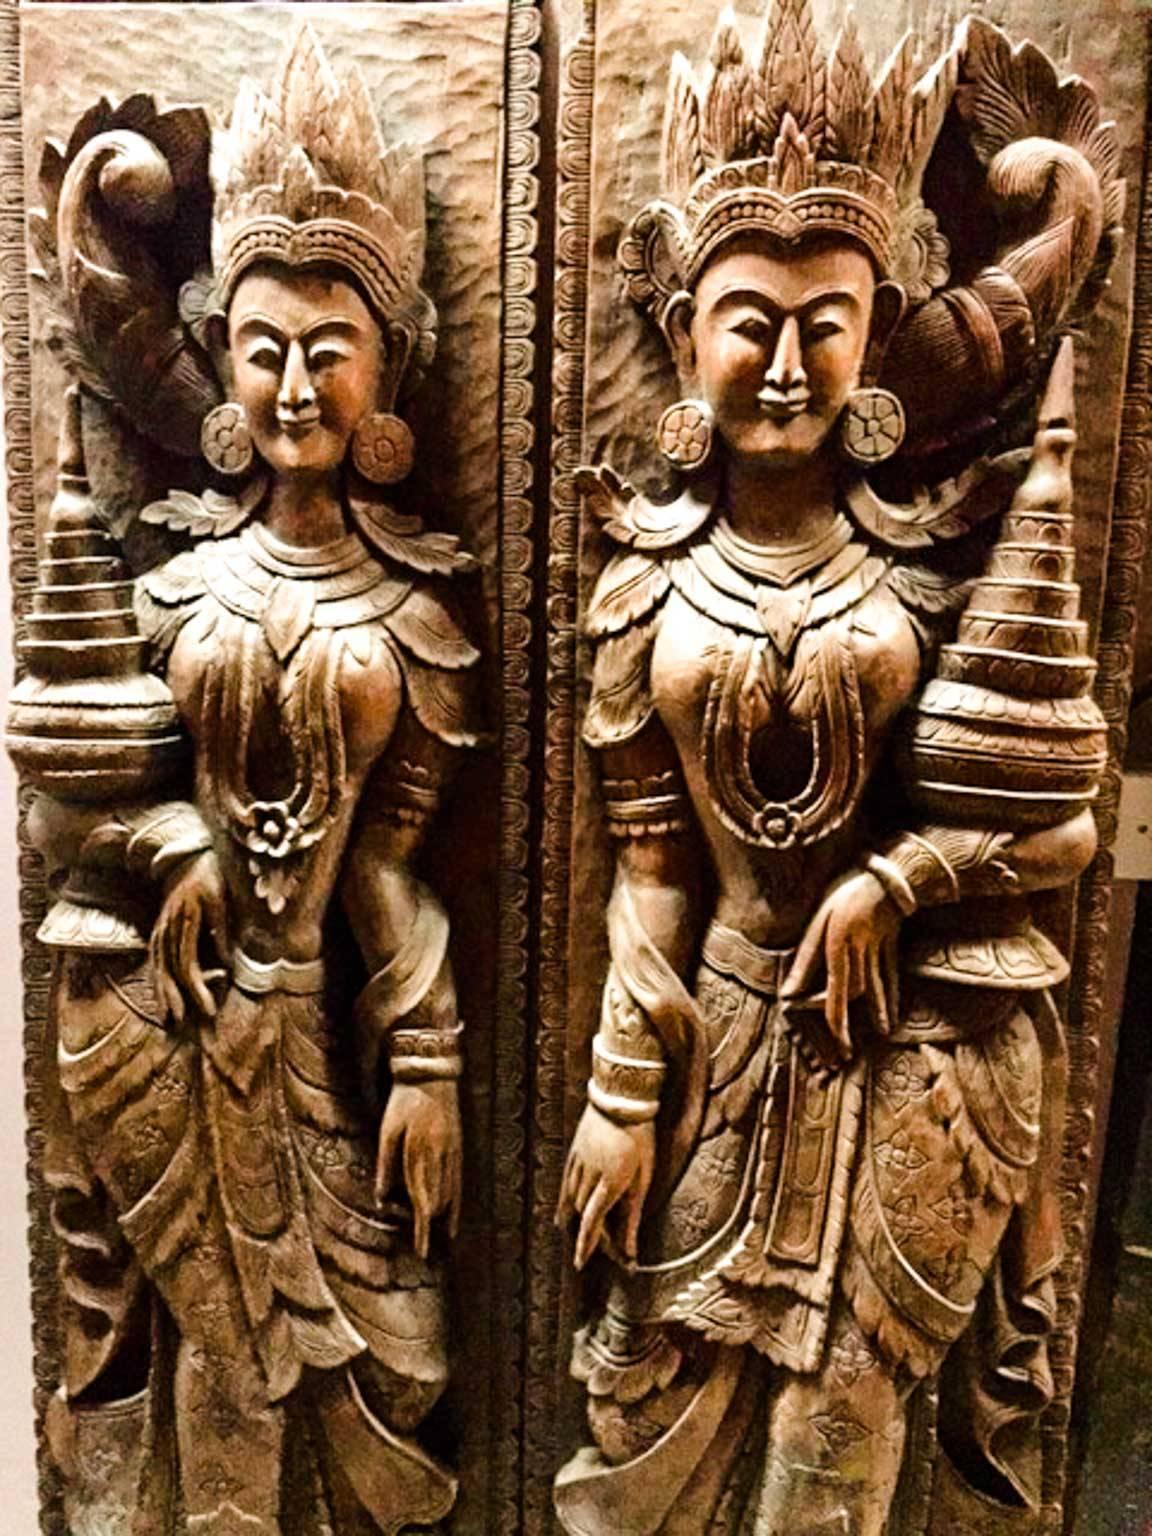 A Beautiful pair of South East Asian carved hardwood goddess panels. Nicely carved detail to face and bodies. Just over six feet tall and extremely heavy. Not sure of age. I would say 20th century. Highly decorative and well executed they would look